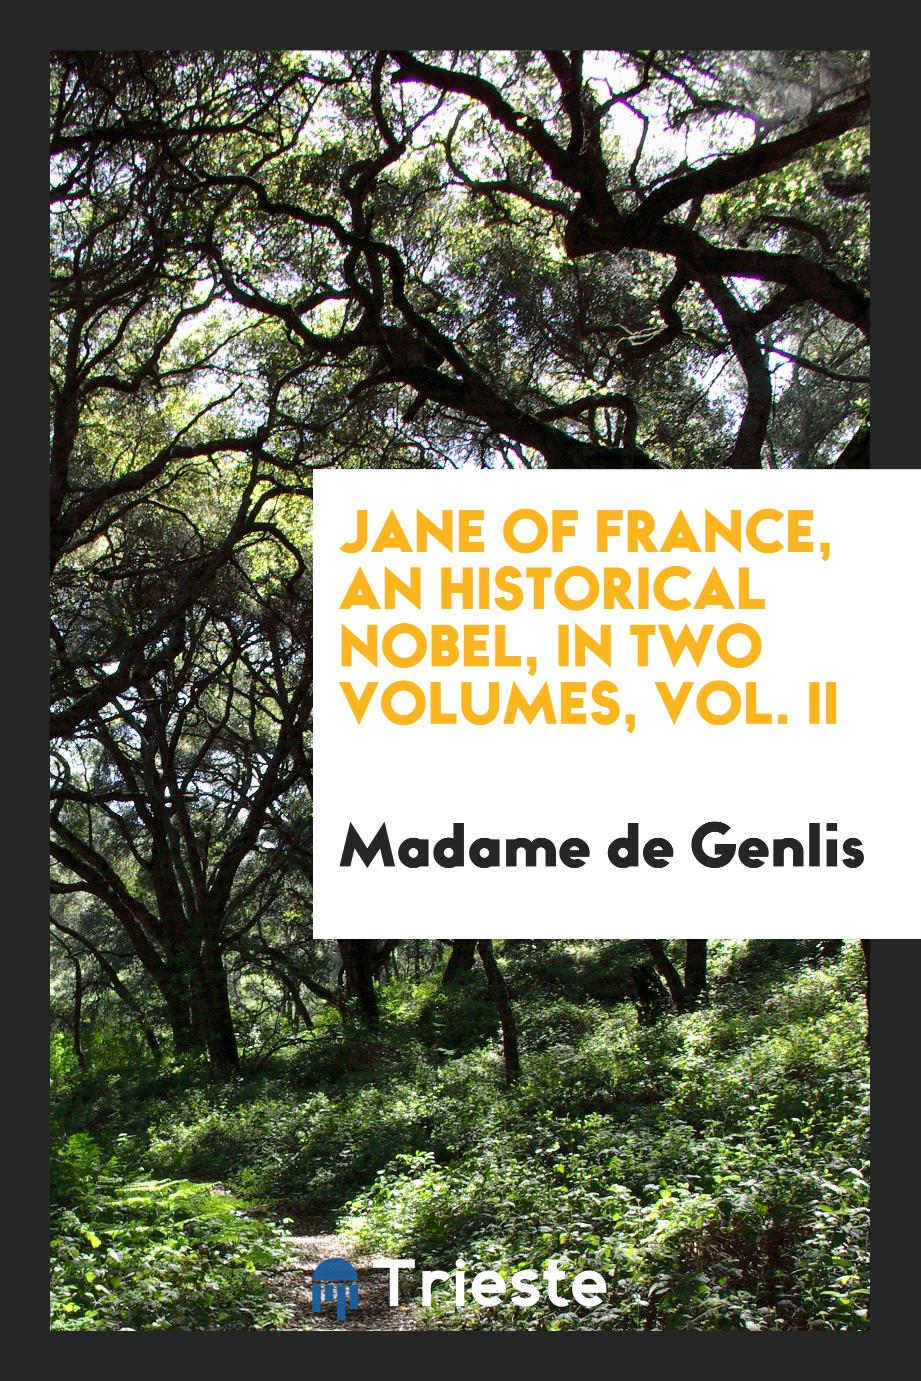 Jane of France, an Historical Nobel, in Two Volumes, Vol. II